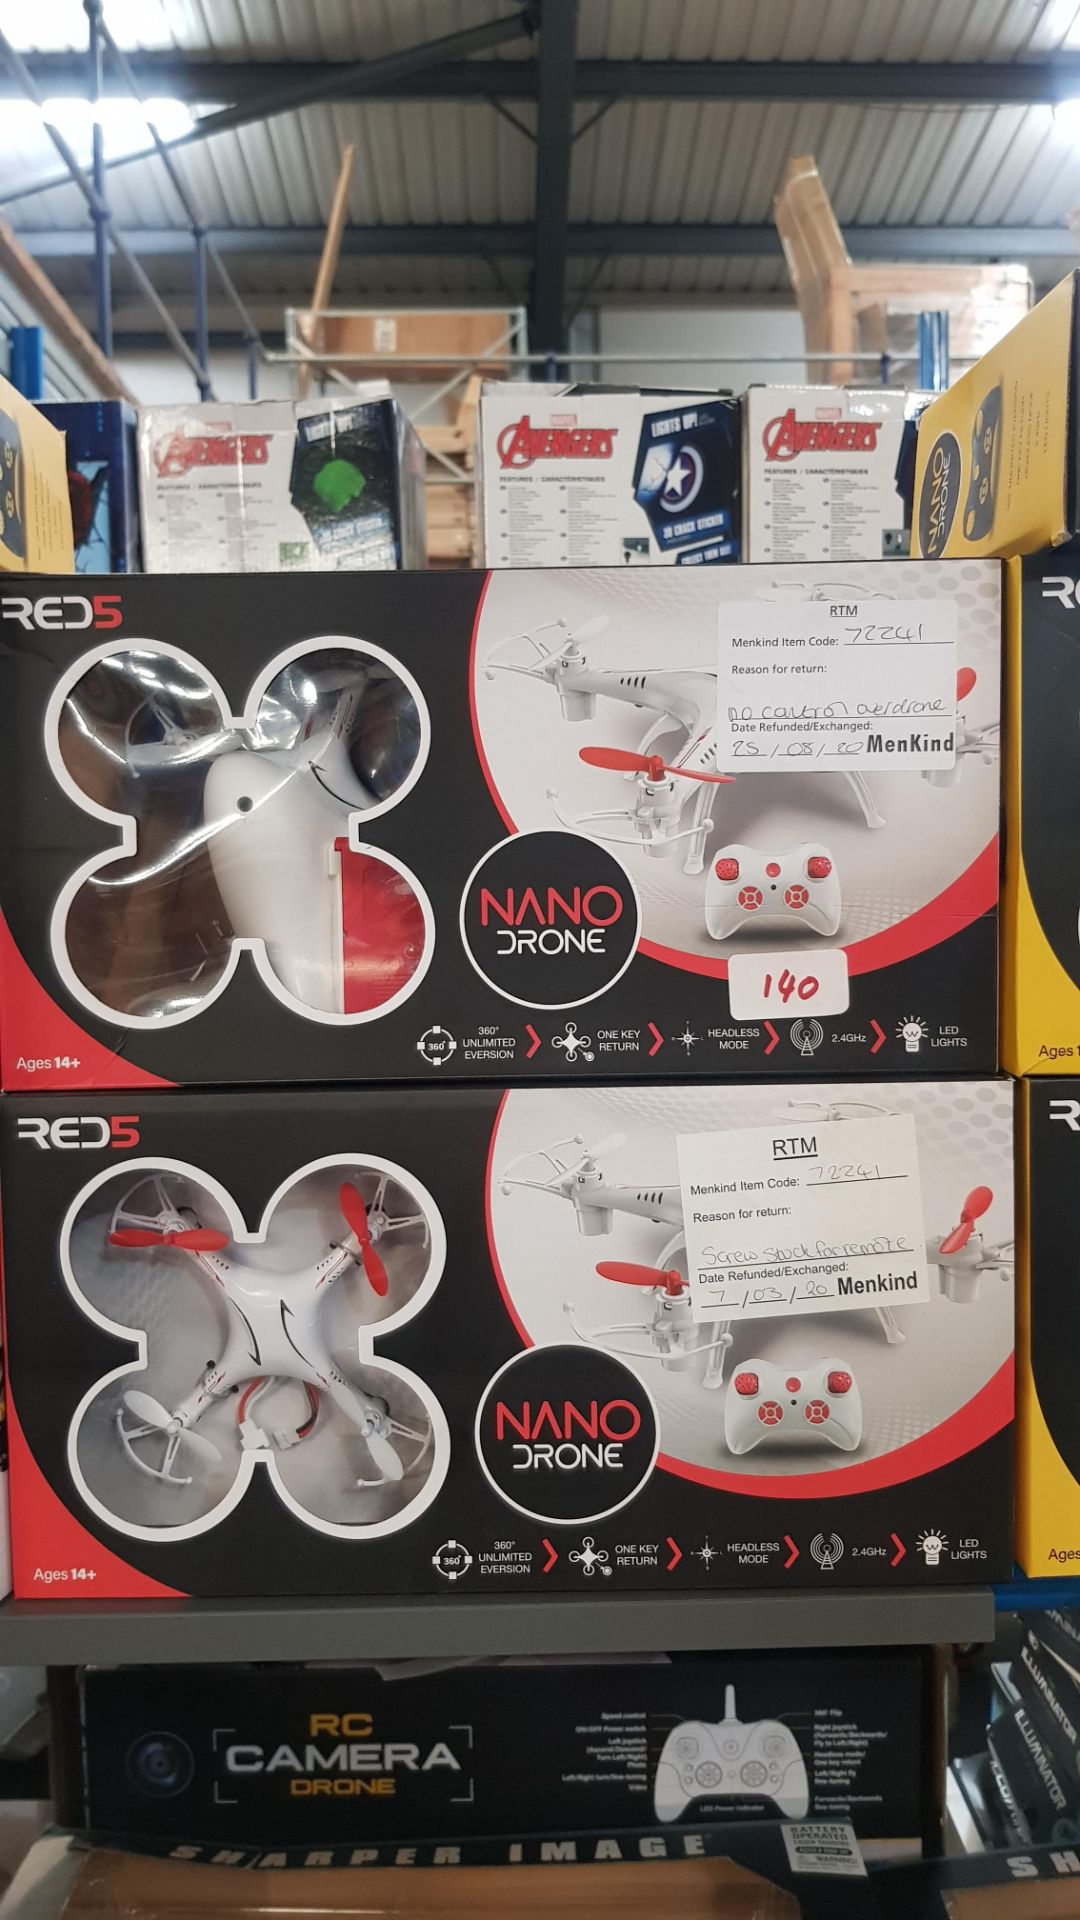 (R3P) 10x Red5 Nano Drone. (All With RTM Stickers) - Image 2 of 2